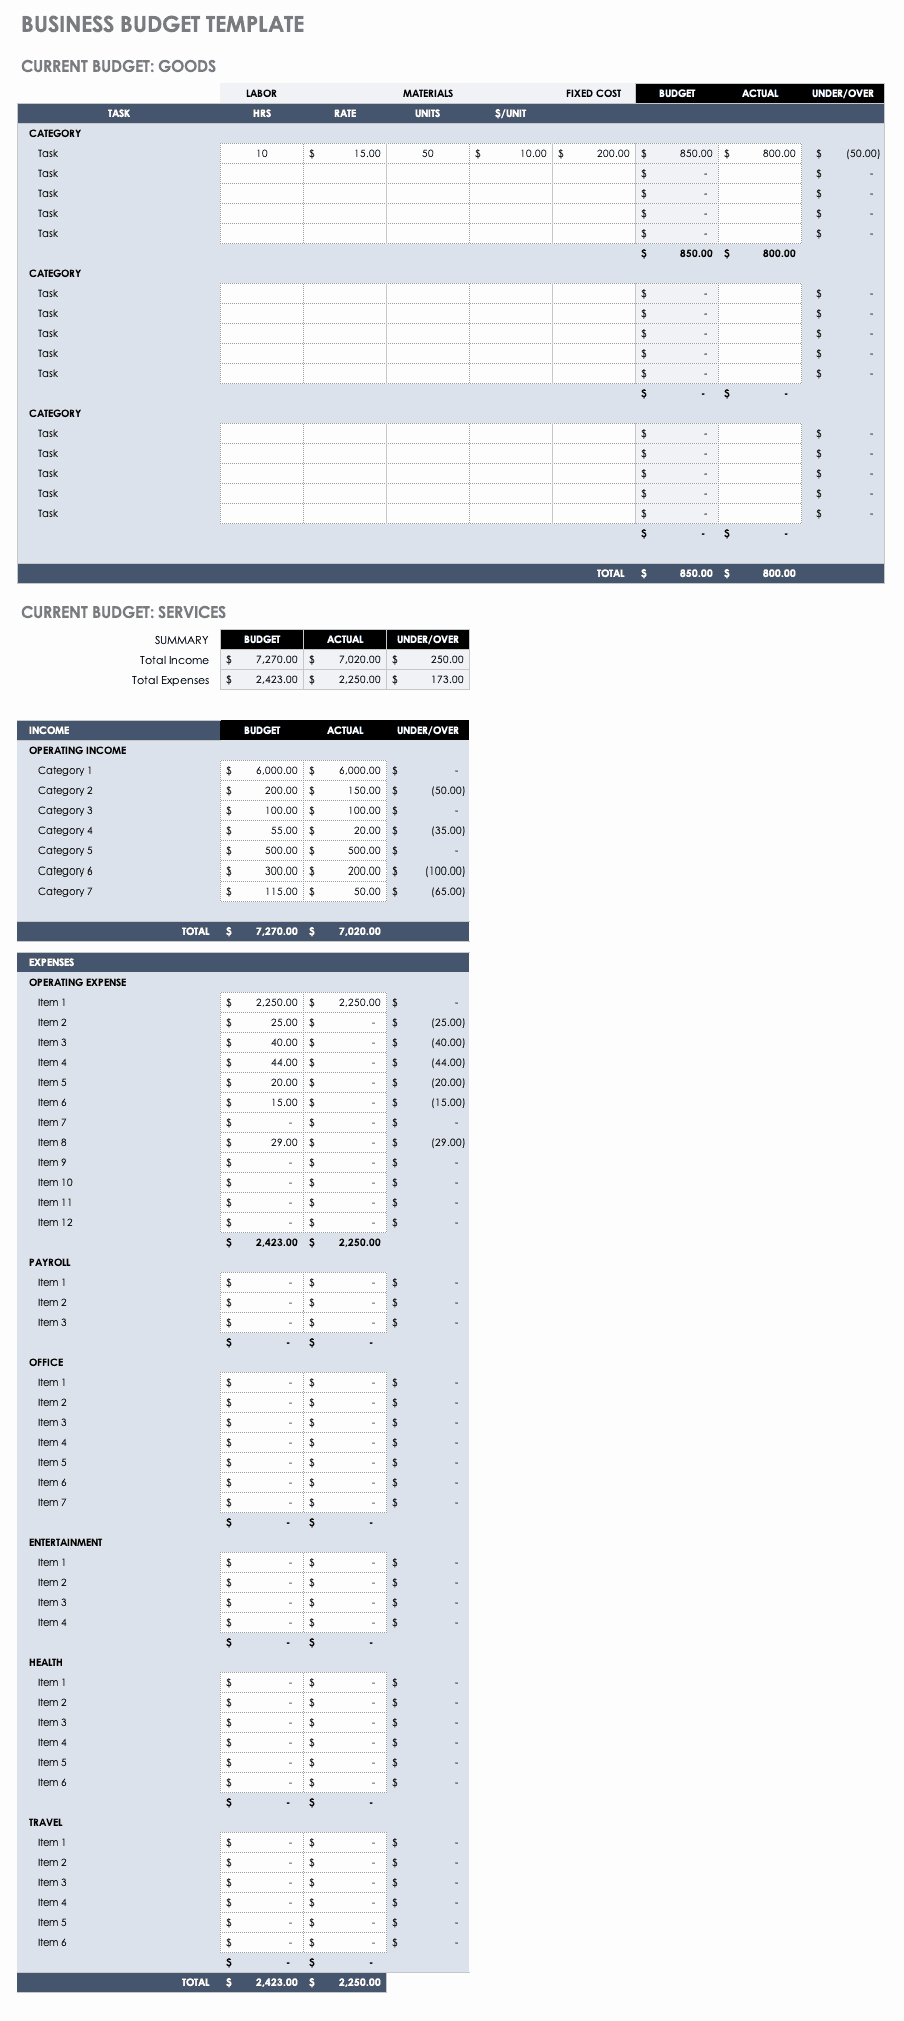 Business Budget Template Excel Lovely Free Bud Templates In Excel